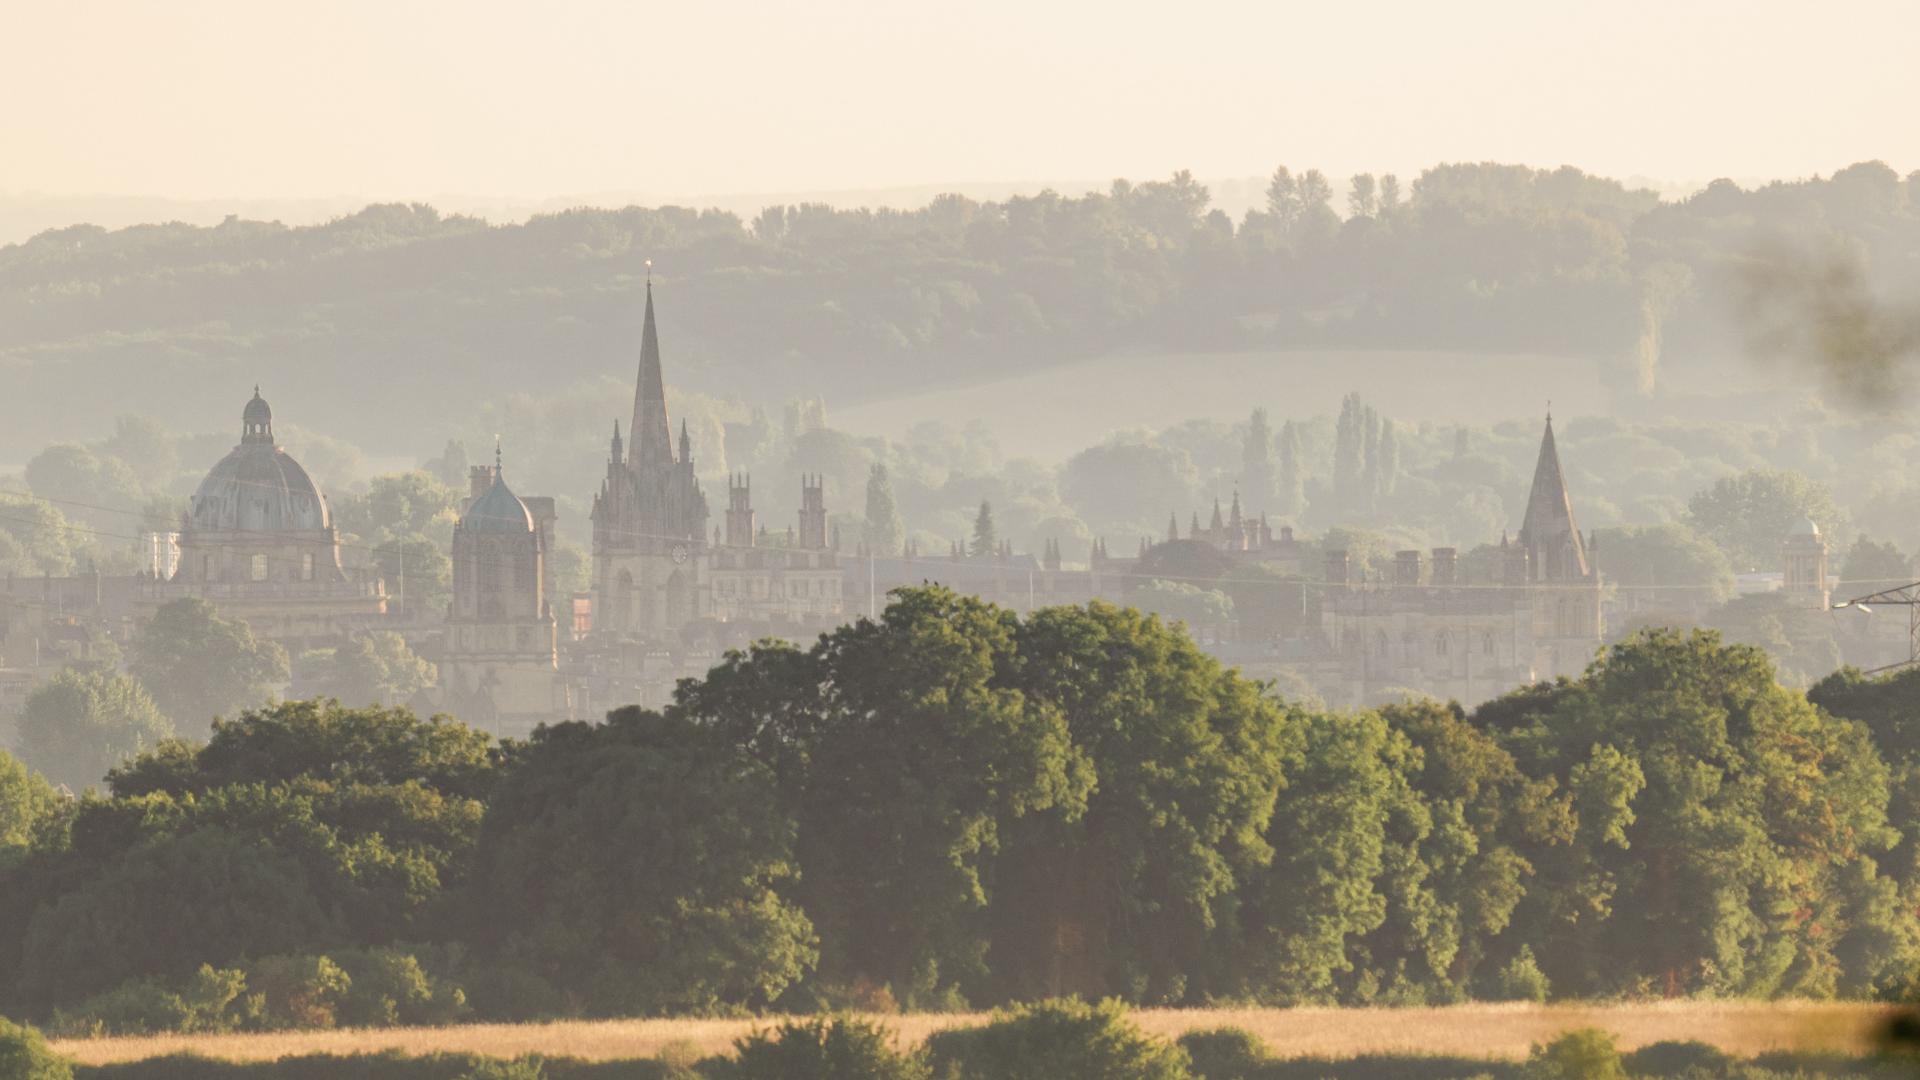 View of Oxford's dreaming spires